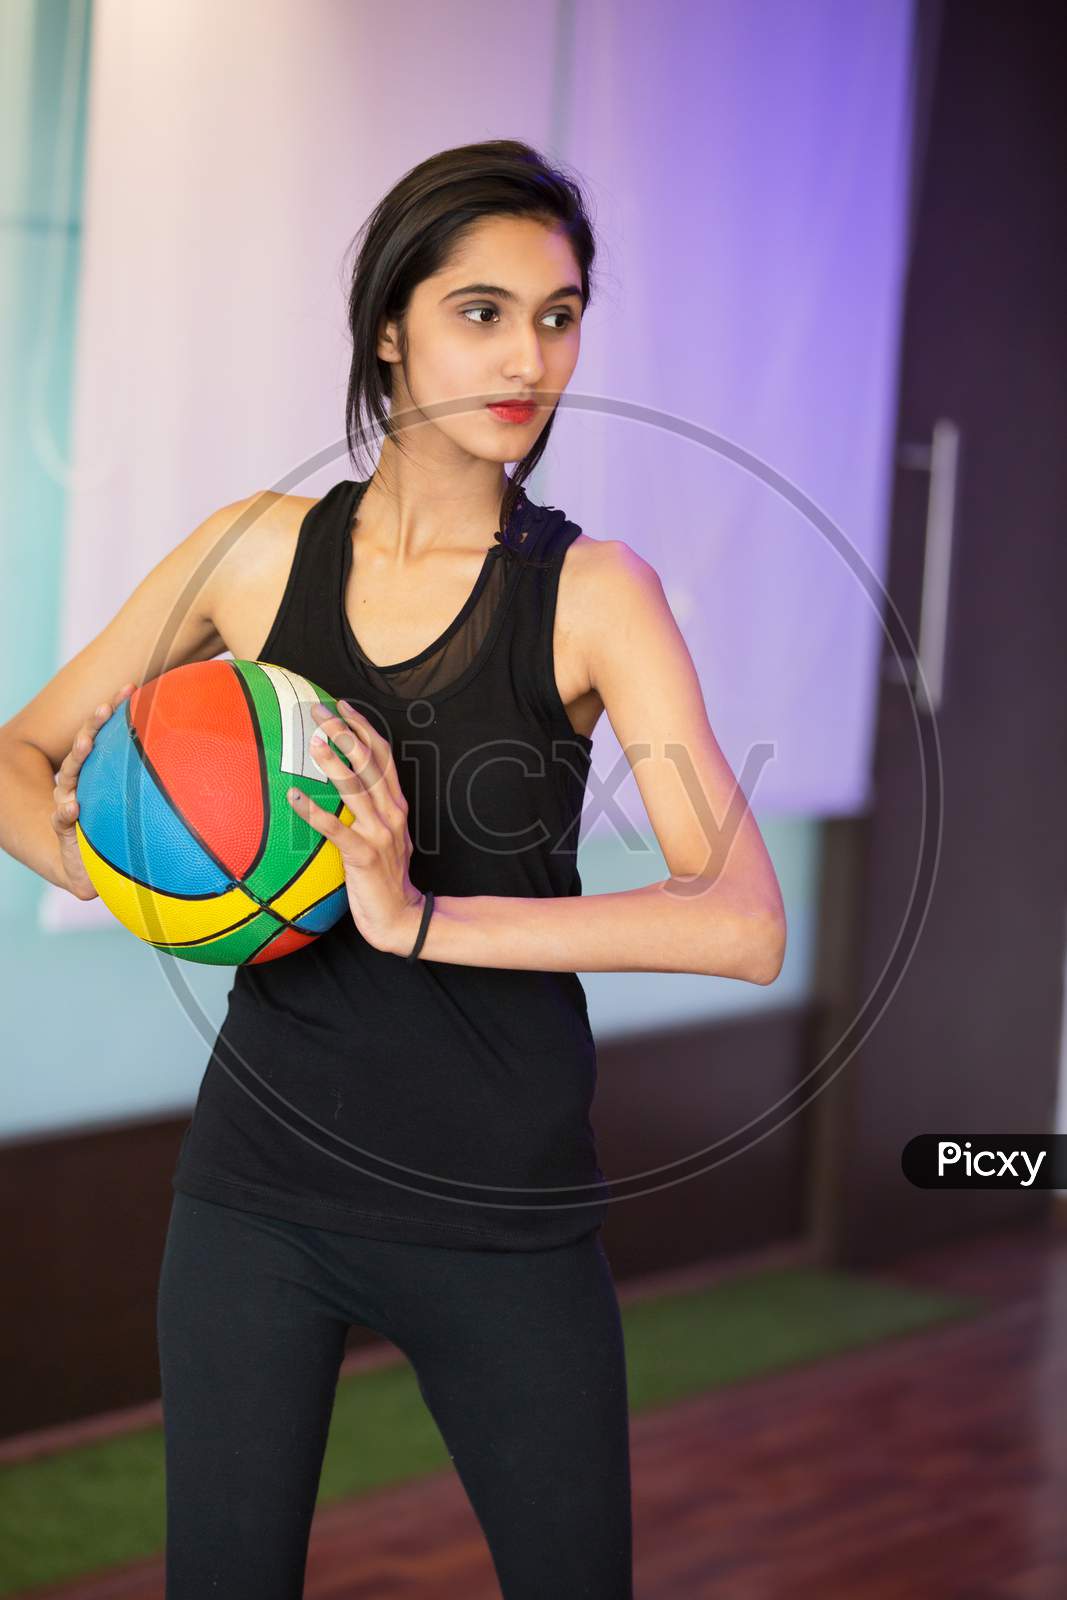 Girl Exercising With A Colorful Ball In Hand, Health And Fitness Concept